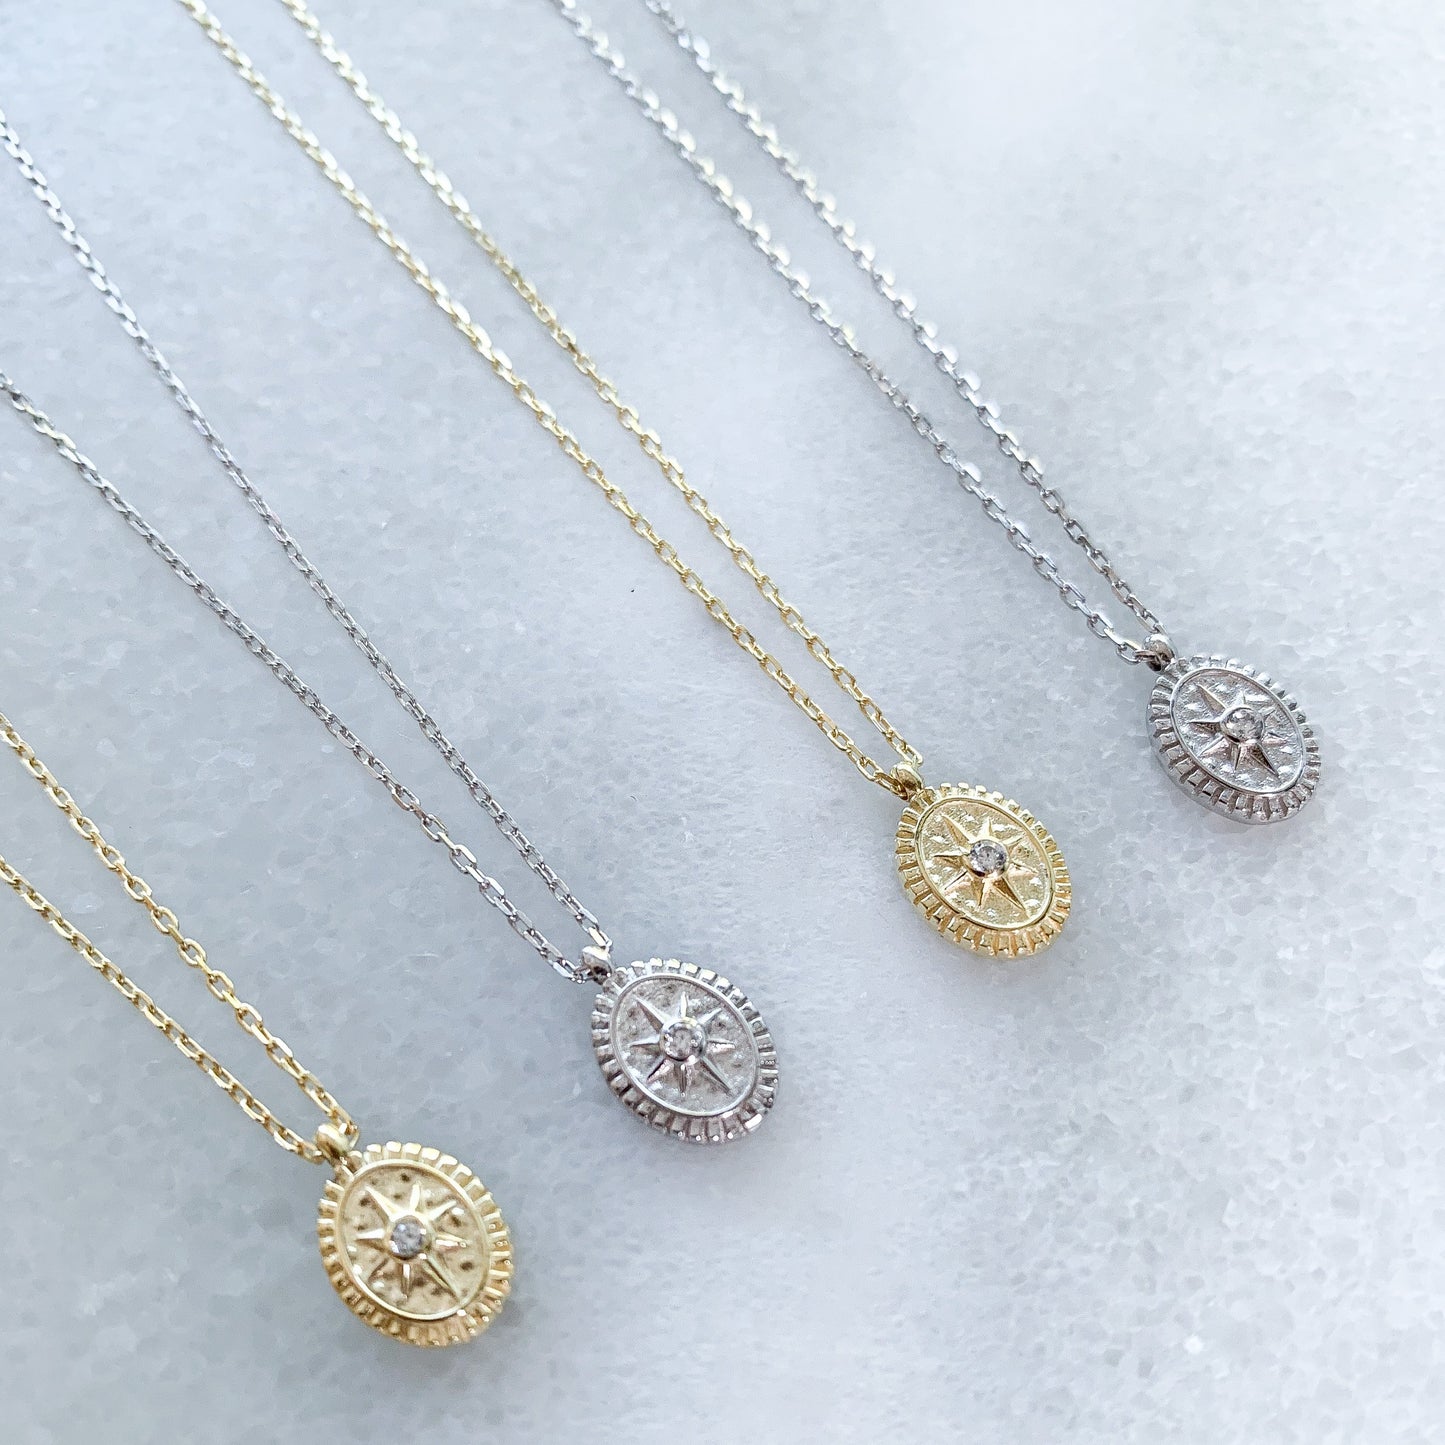 Dainty silver and gold compass charm necklaces - Alexandra Marks Jewelry